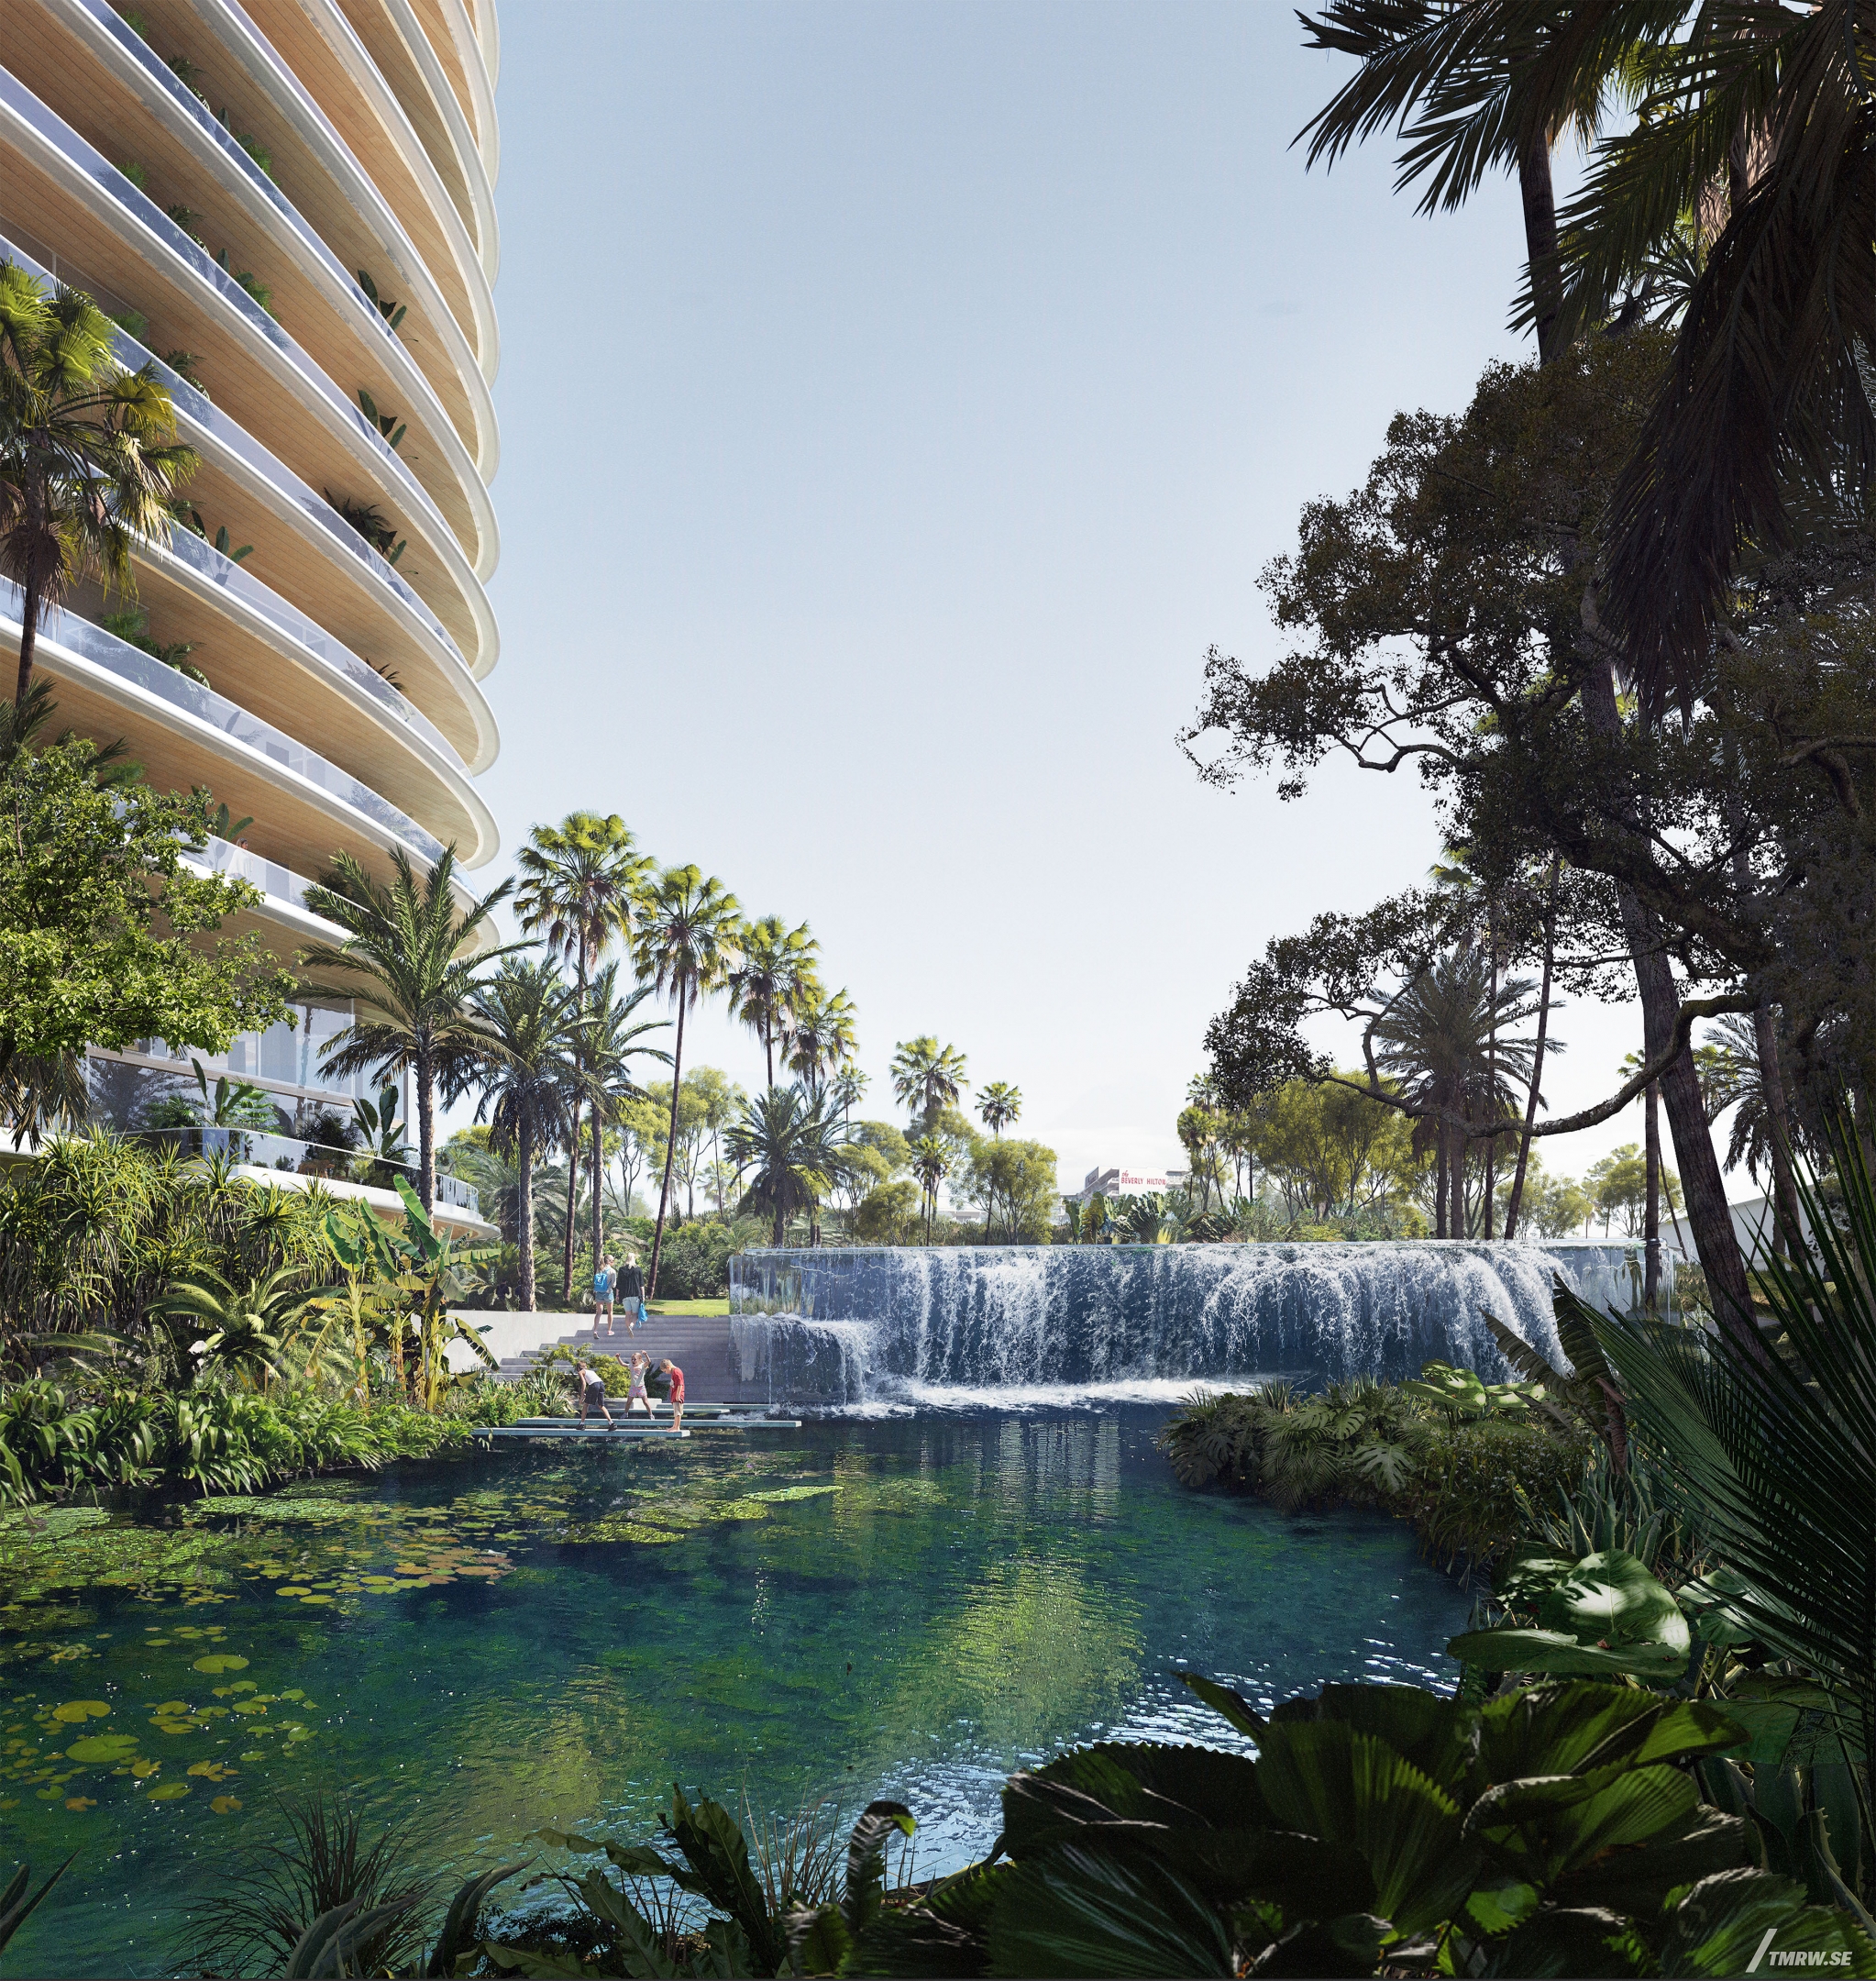 Architectural visualization of One Beverly Hills for Foster & Partners. An image of a backyard of a residential building. A pond with a waterfall surrounded by plants in daylight.